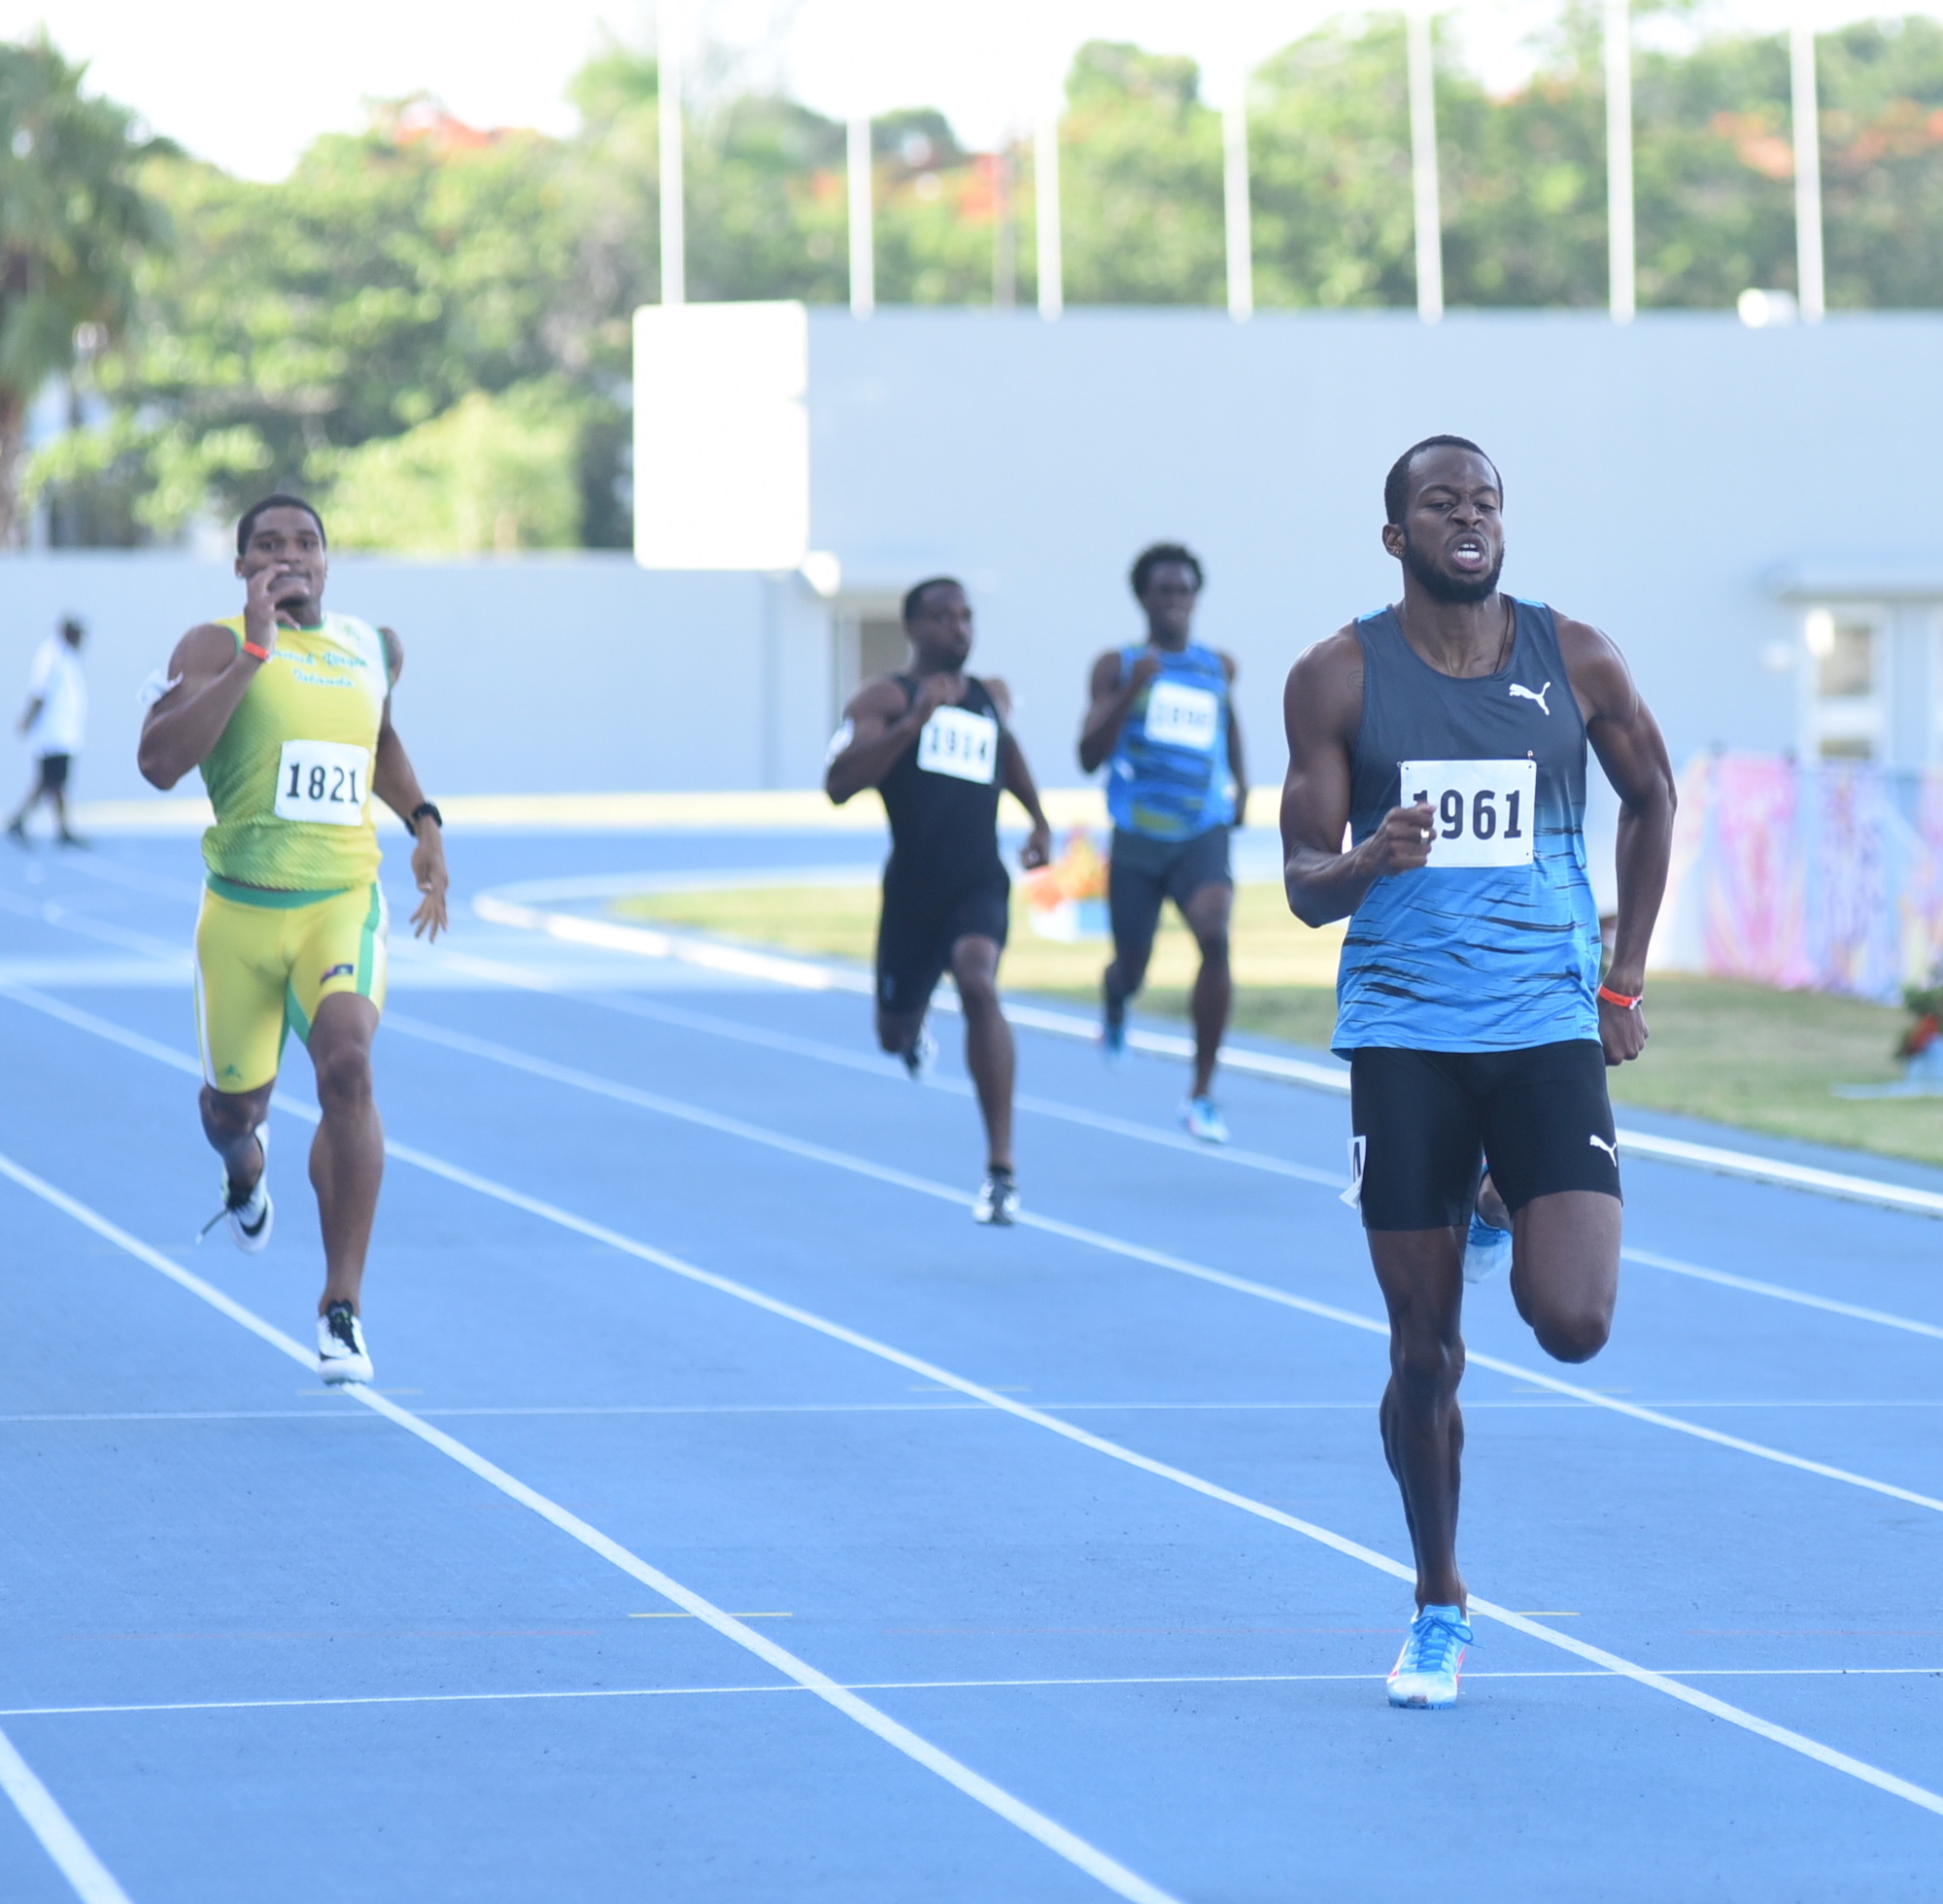 Lendore, Thomas and Walters among Caribbean athletes for American Track League